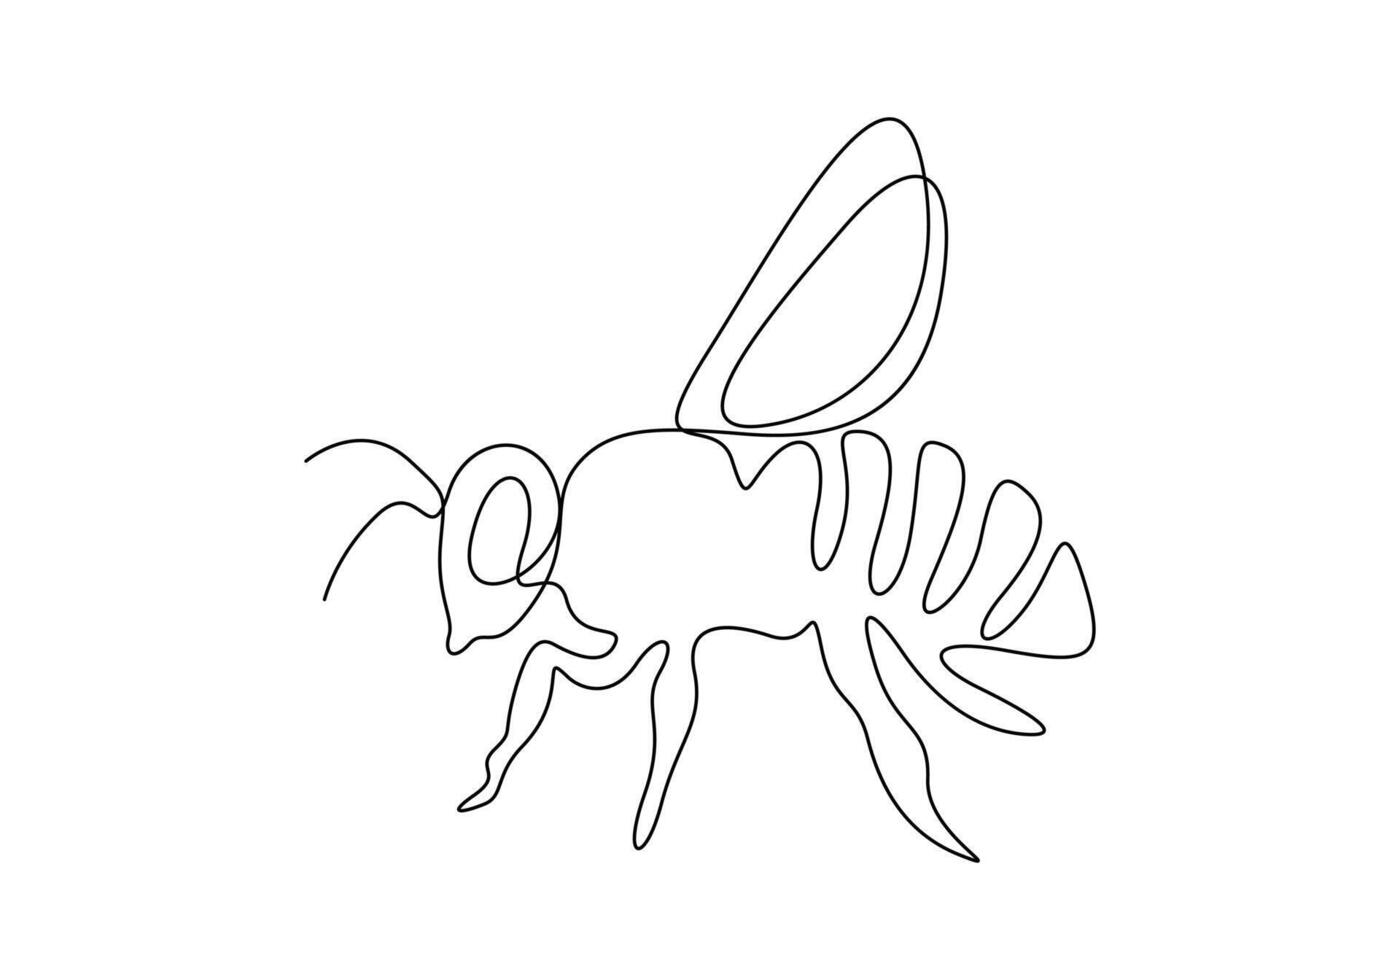 Honey bee in one continuous line drawing digital illustration vector